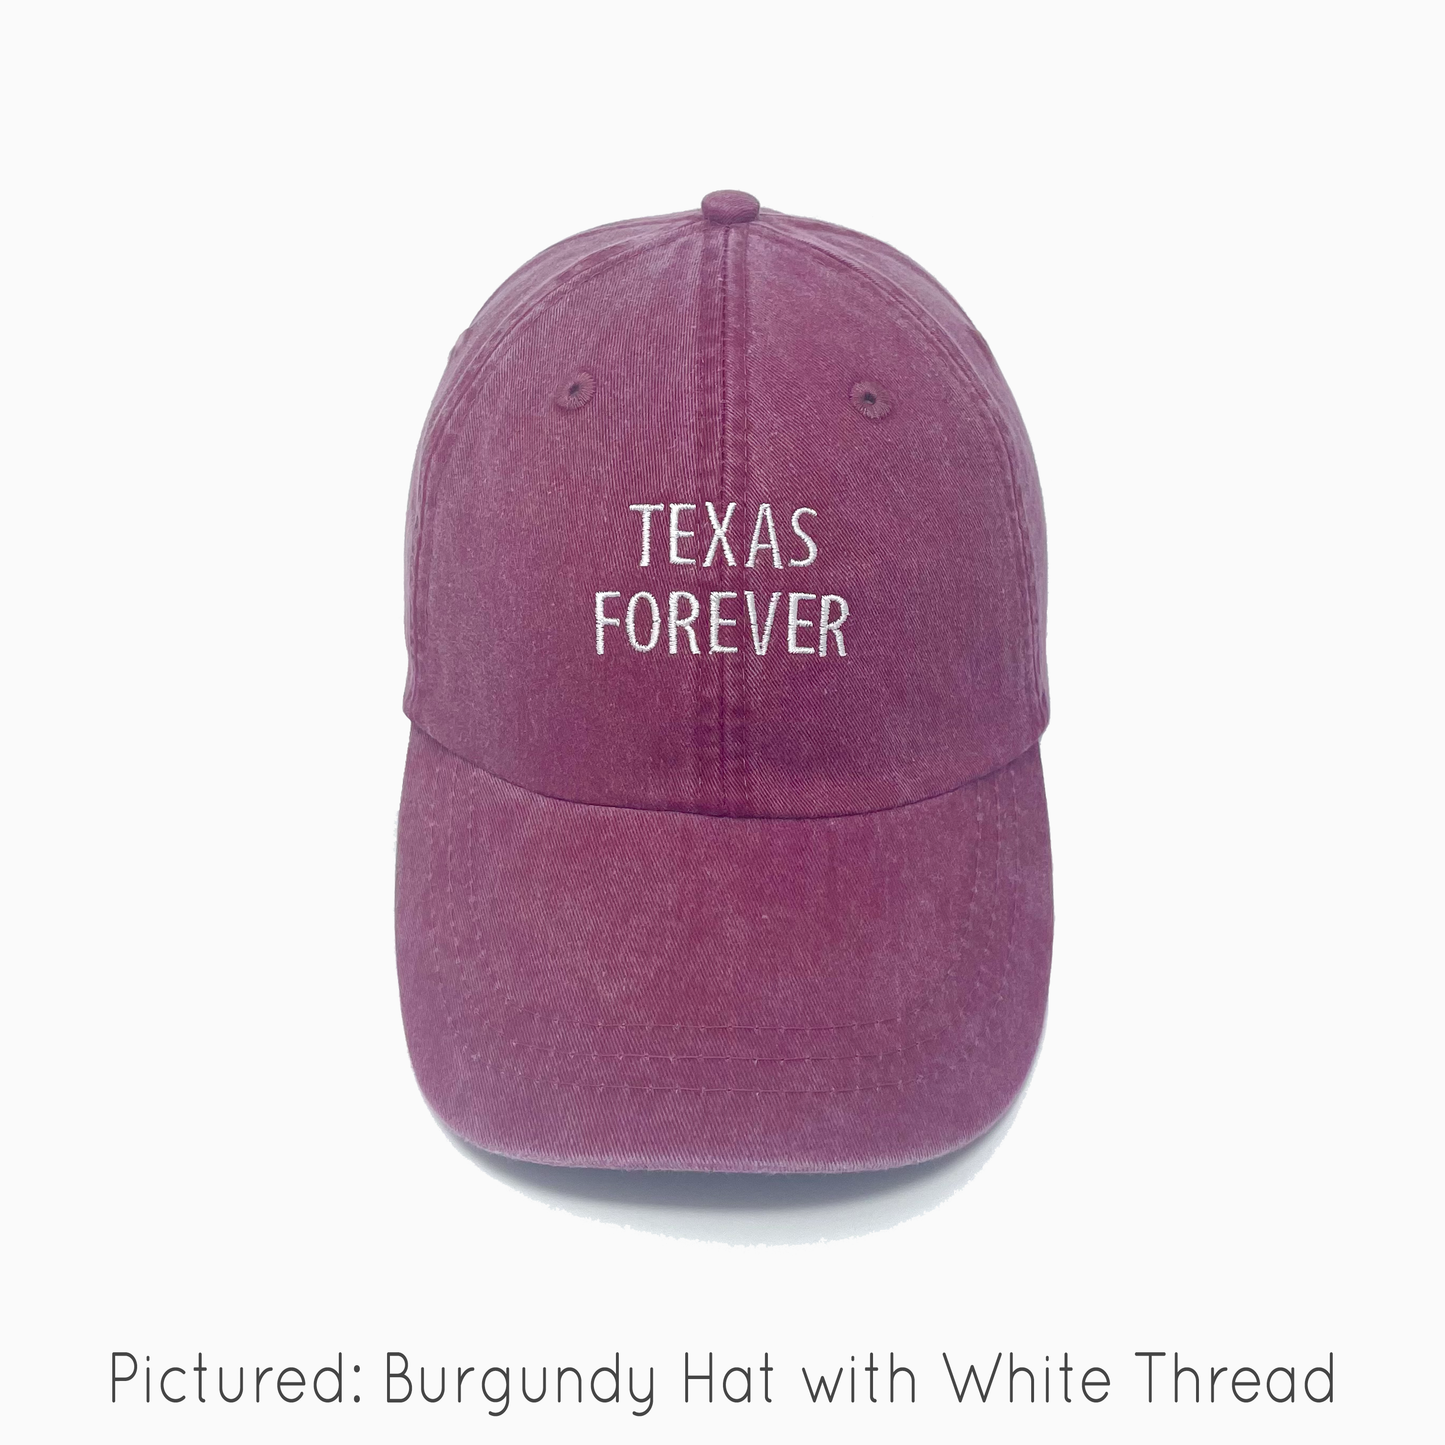 Texas Forever Embroidered Pigment-Dyed Baseball Cap (Block Condensed Font) - Adult Unisex